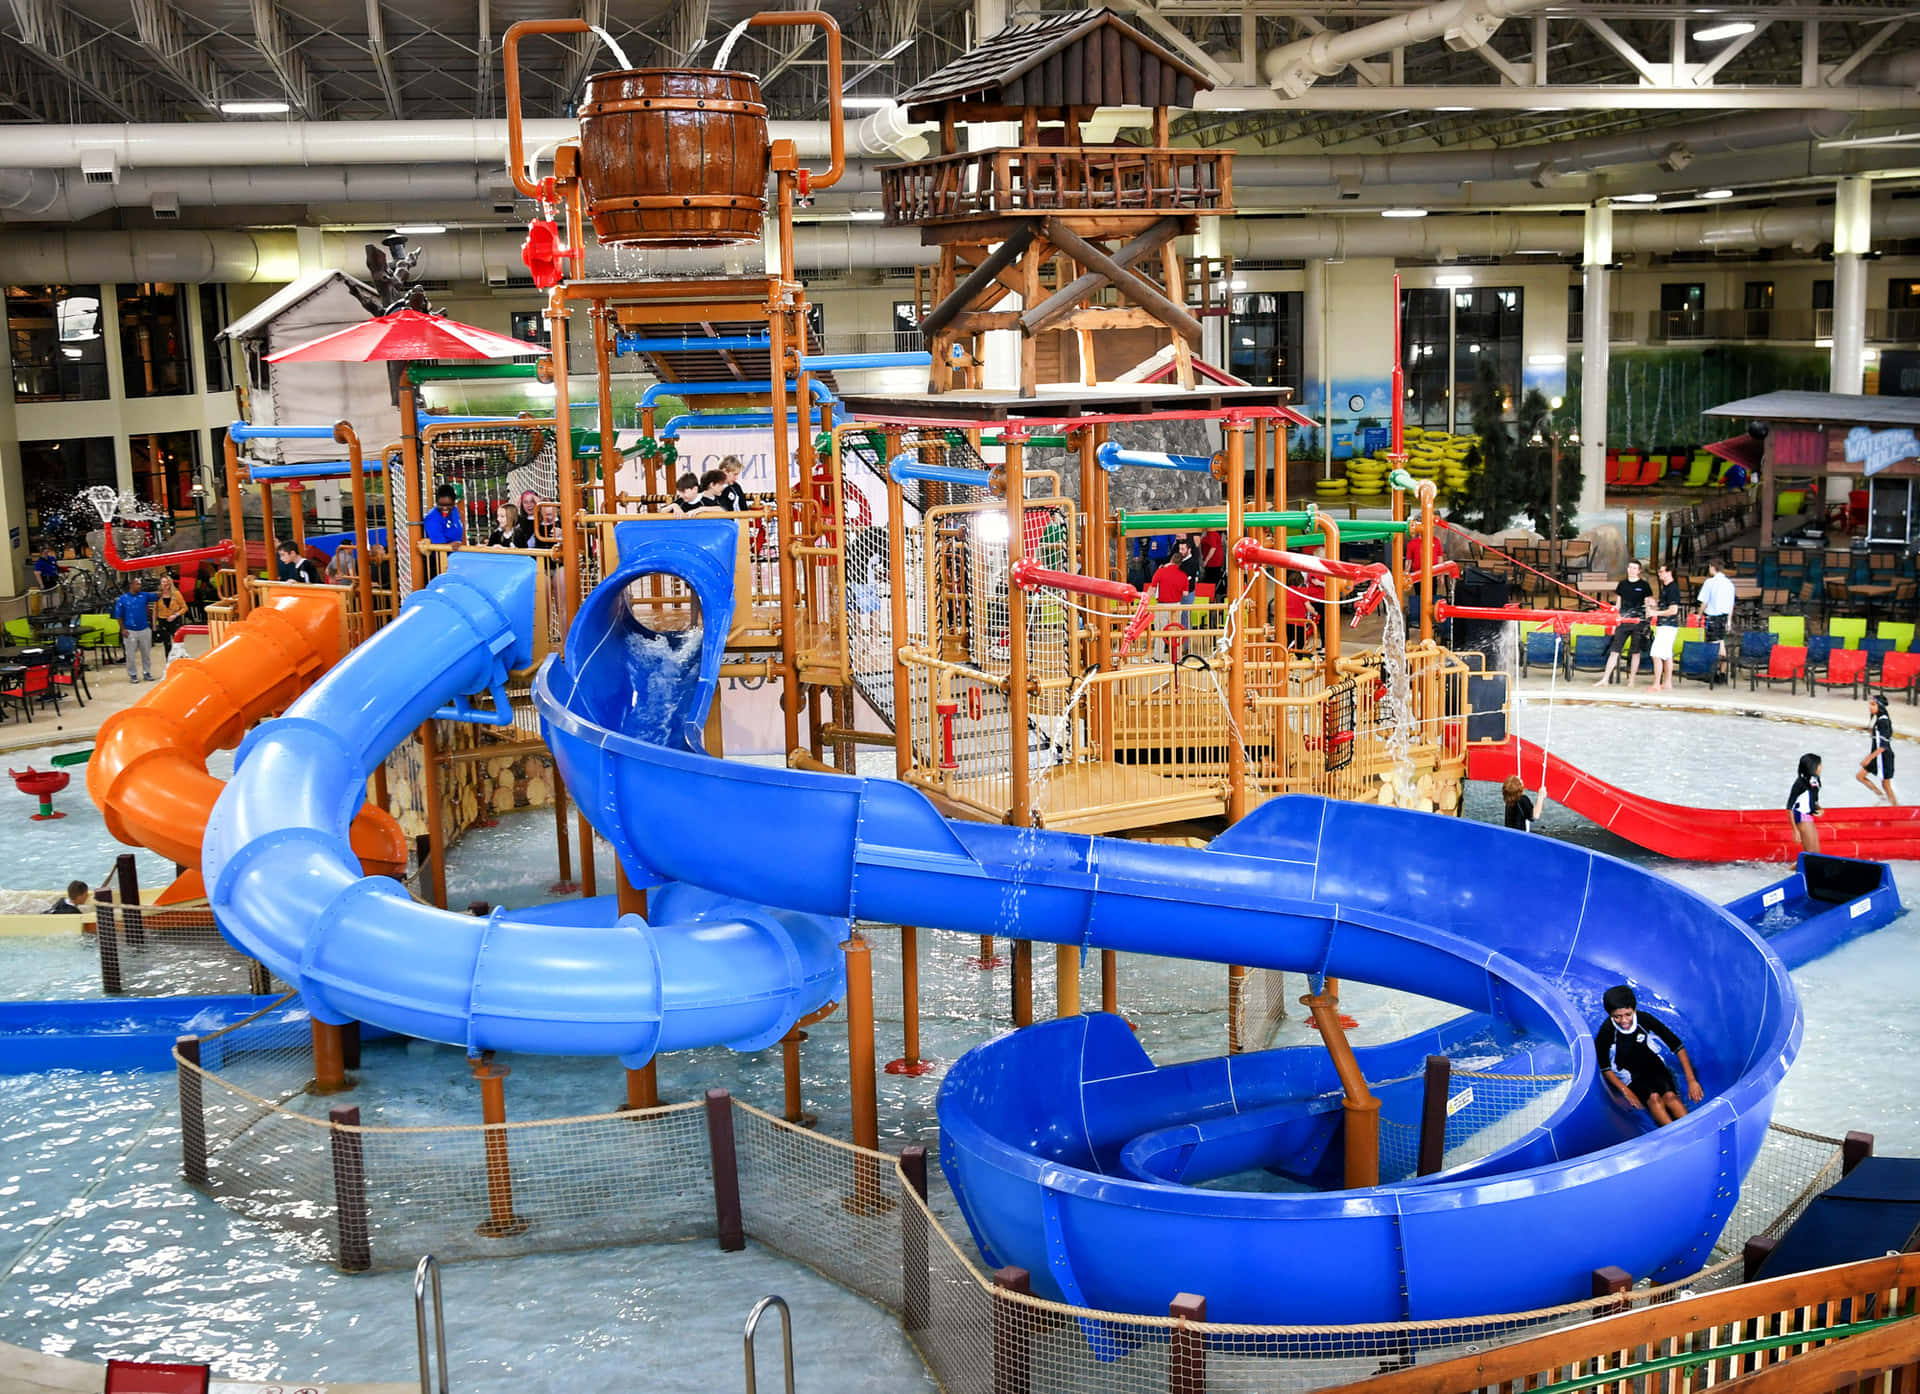 Download A fun, family getaway awaits you at Great Wolf Lodge